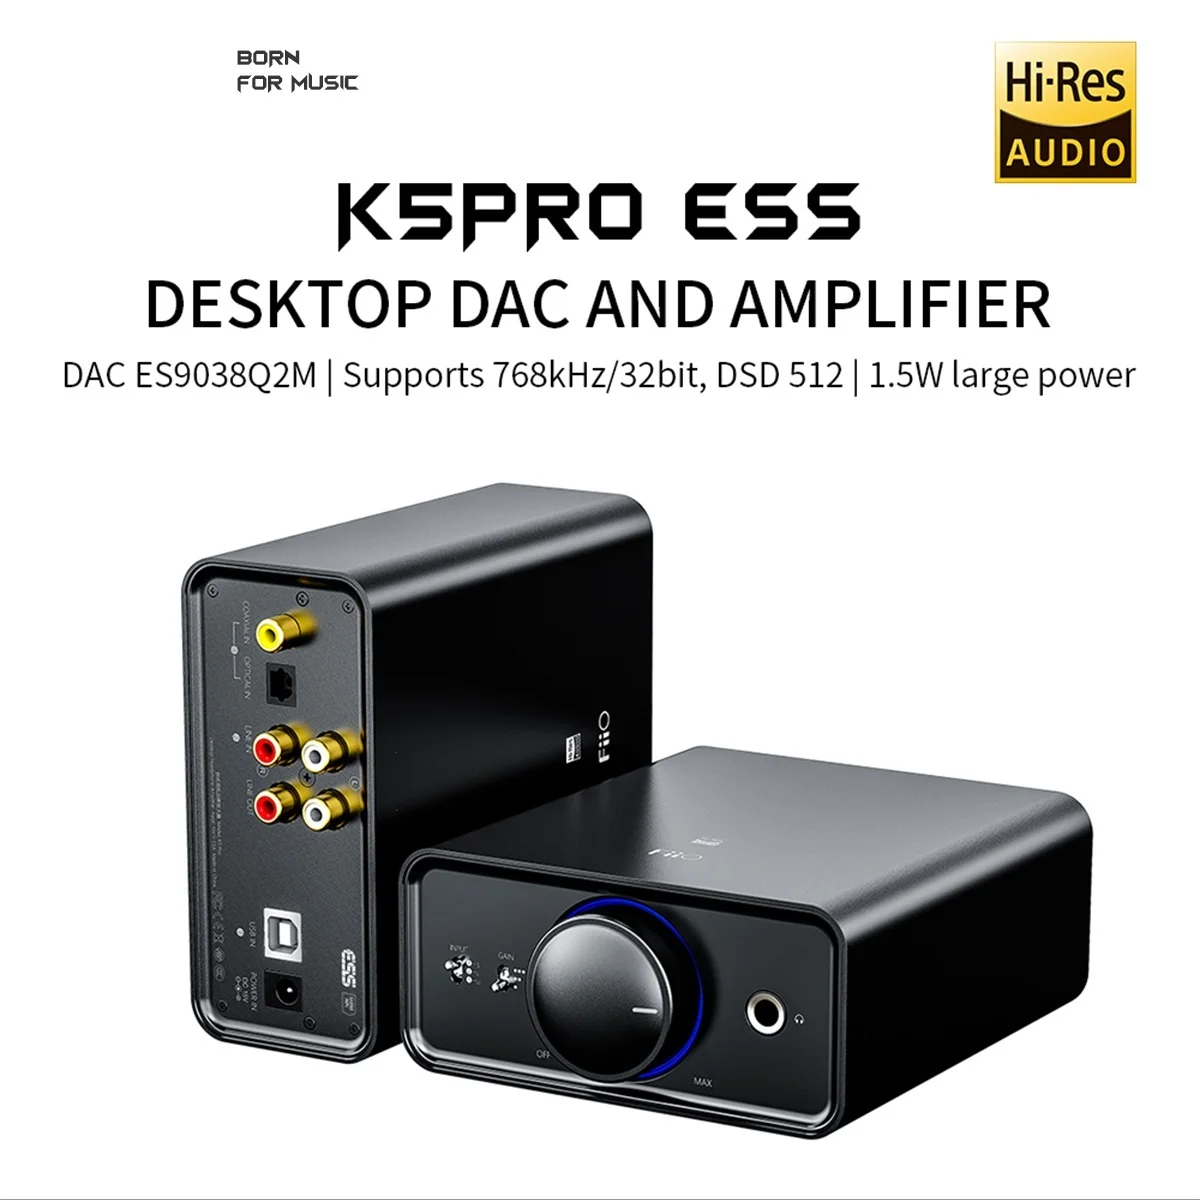 

New K5 Pro ESS ES9038Q2M|768K/32Bit and DSD decoding Deskstop DAC and Amplifier for Home and Computer